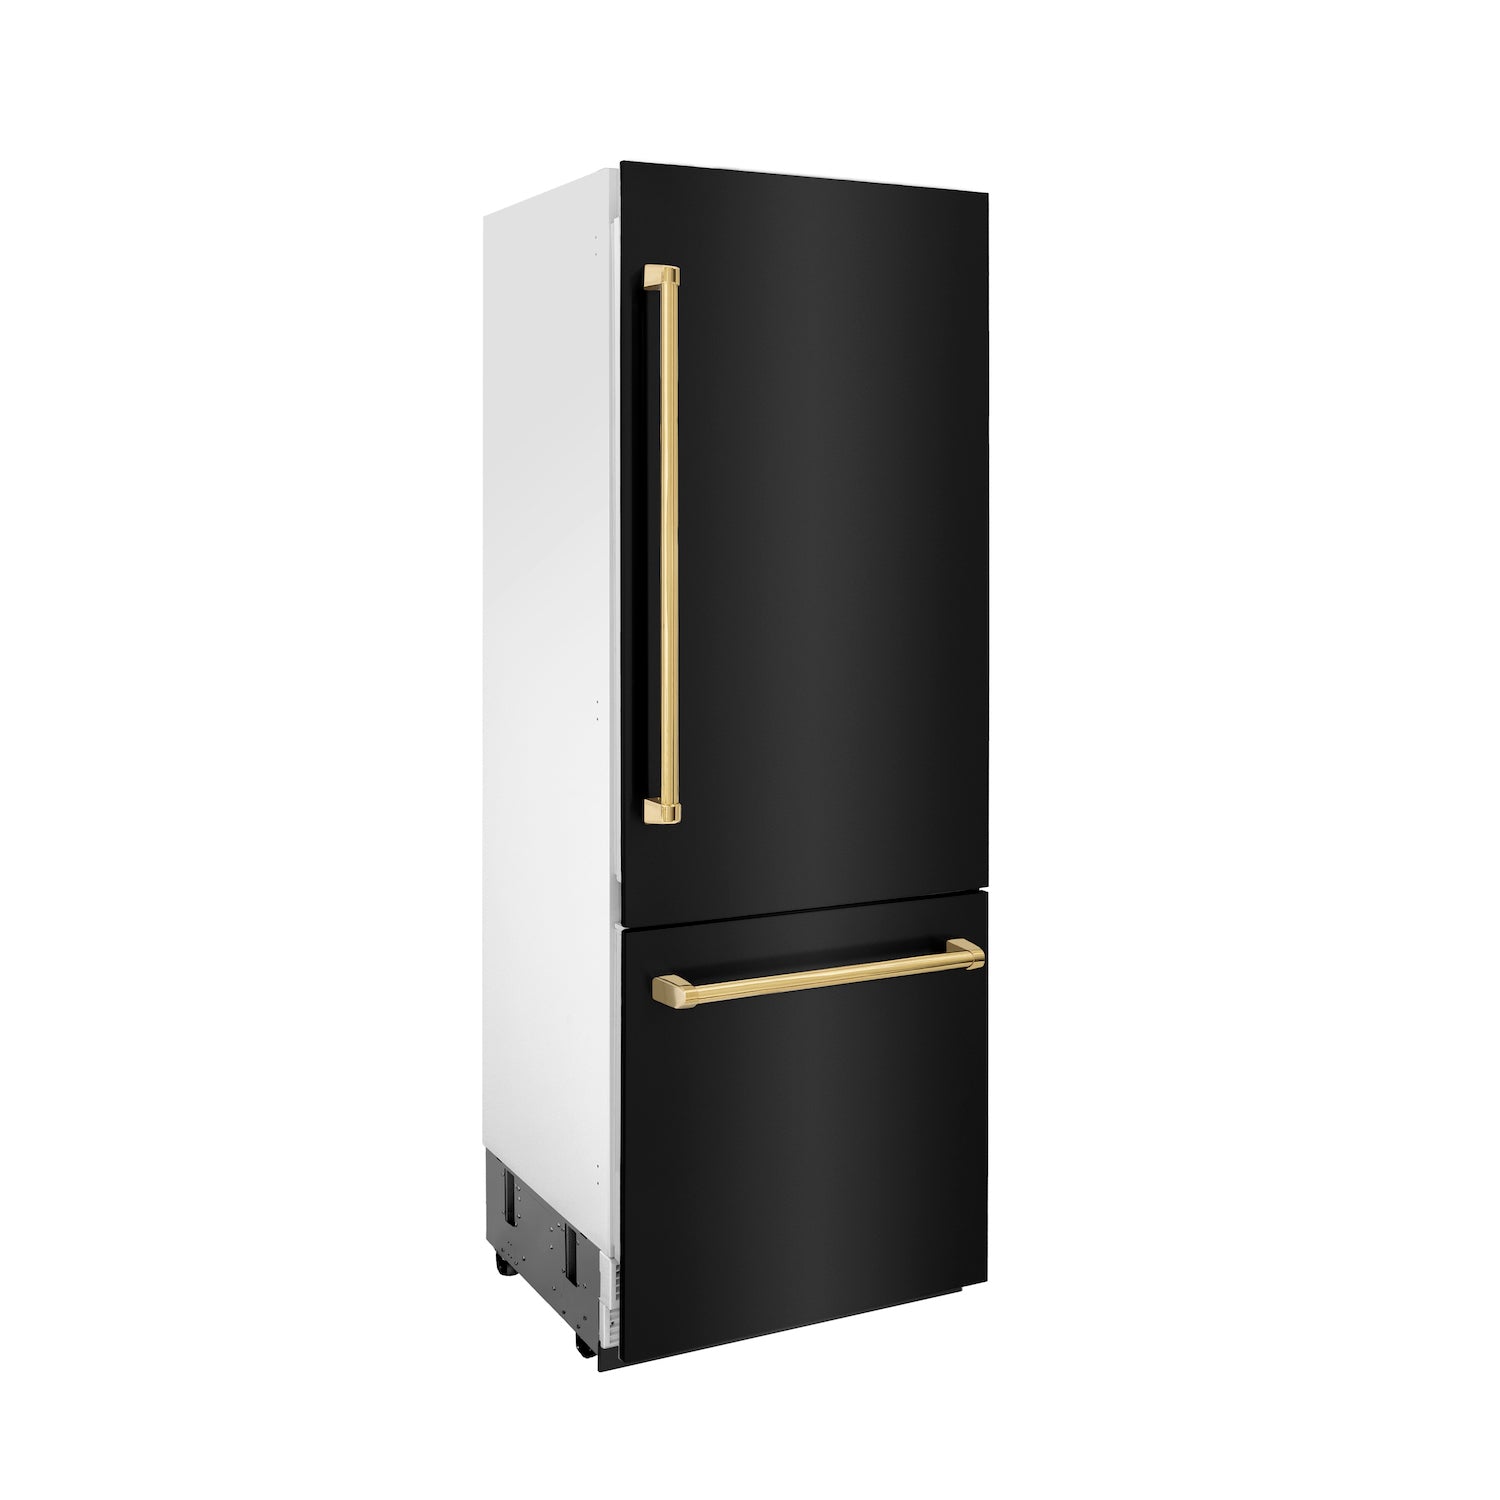 ZLINE Autograph Edition 30 in. 16.1 cu. ft. Built-in 2-Door Bottom Freezer Refrigerator with Internal Water and Ice Dispenser in Black Stainless Steel with Polished Gold Accents (RBIVZ-BS-30-G) side.